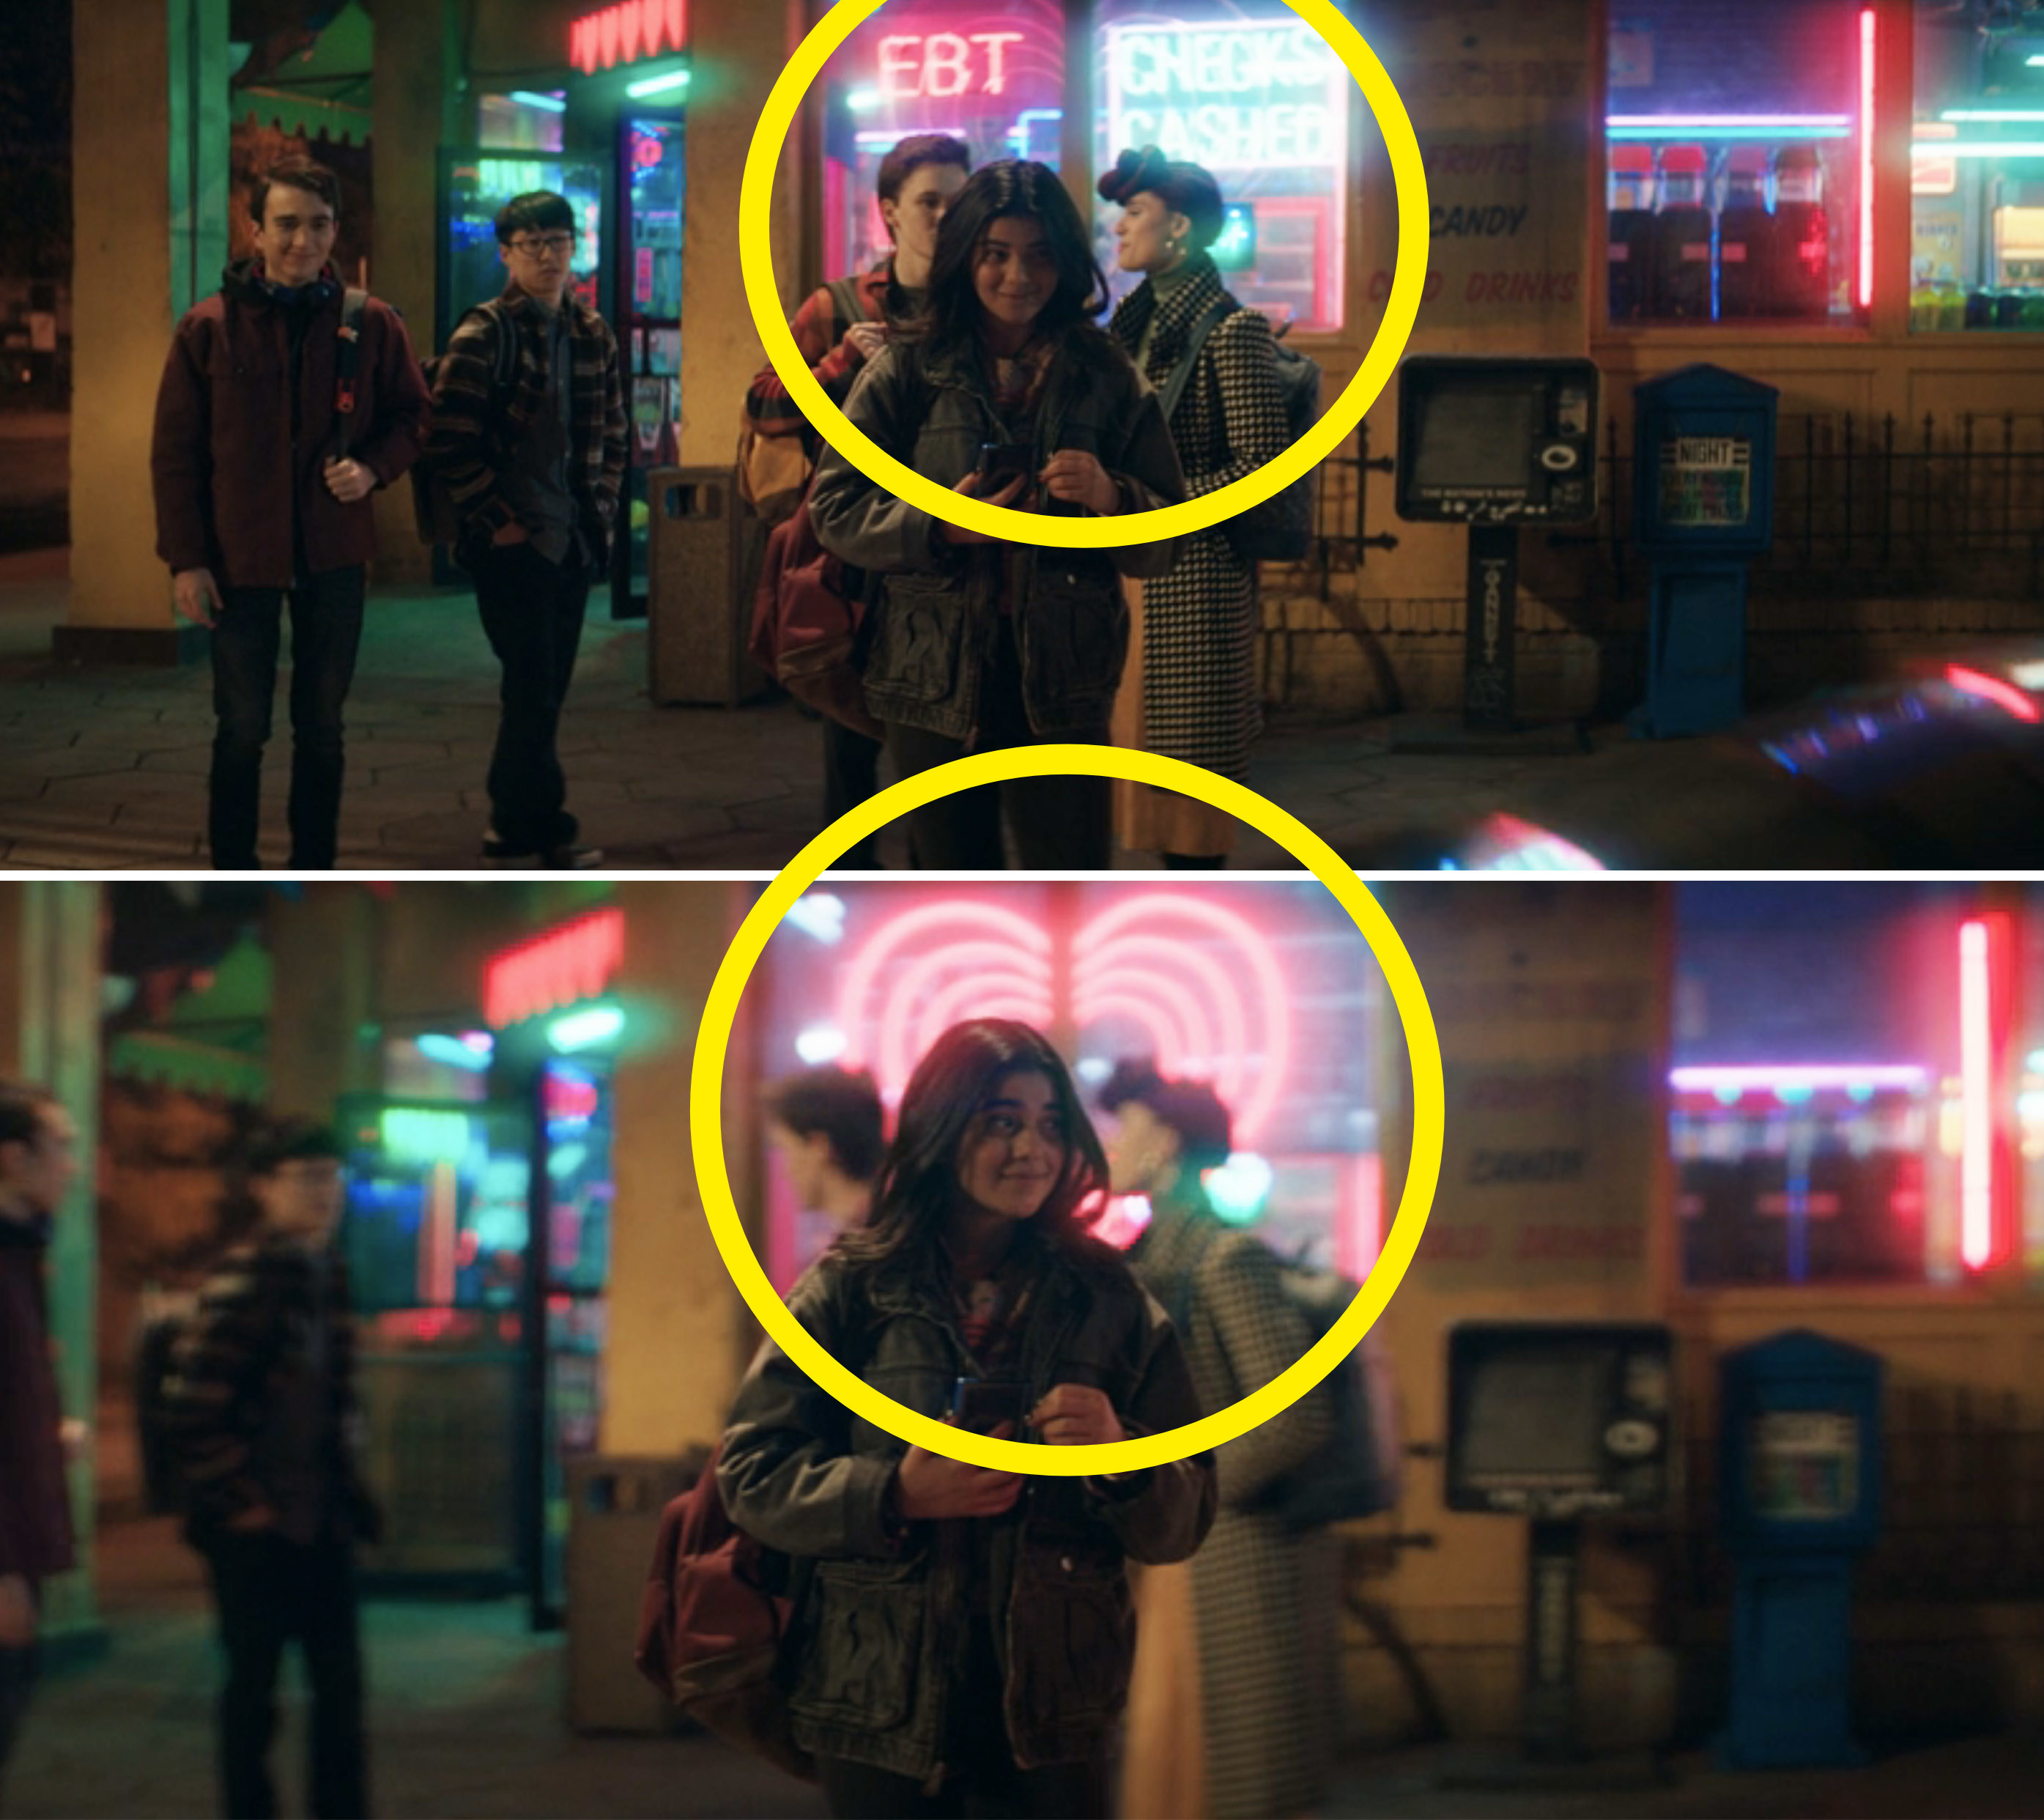 Kamala is standing in front of neon signs saying checks can be cashed inside, but later in the scene, those signs are replaced with a large pink heart